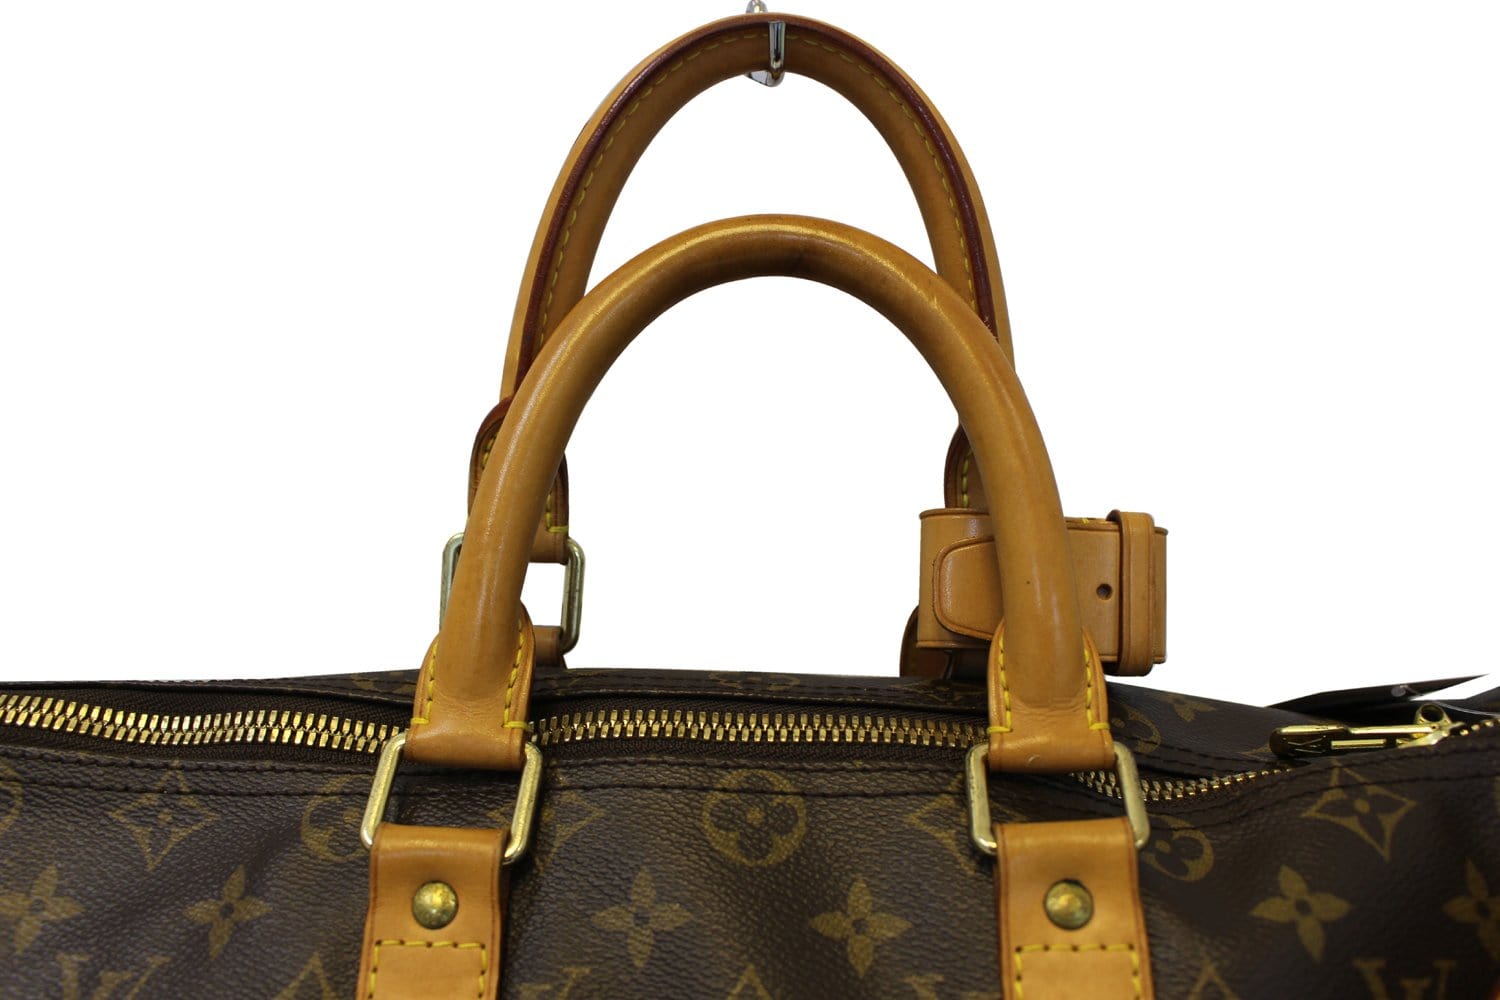 LOUIS VUITTON KEEPALL 45 🧳 do I think it's worth it?